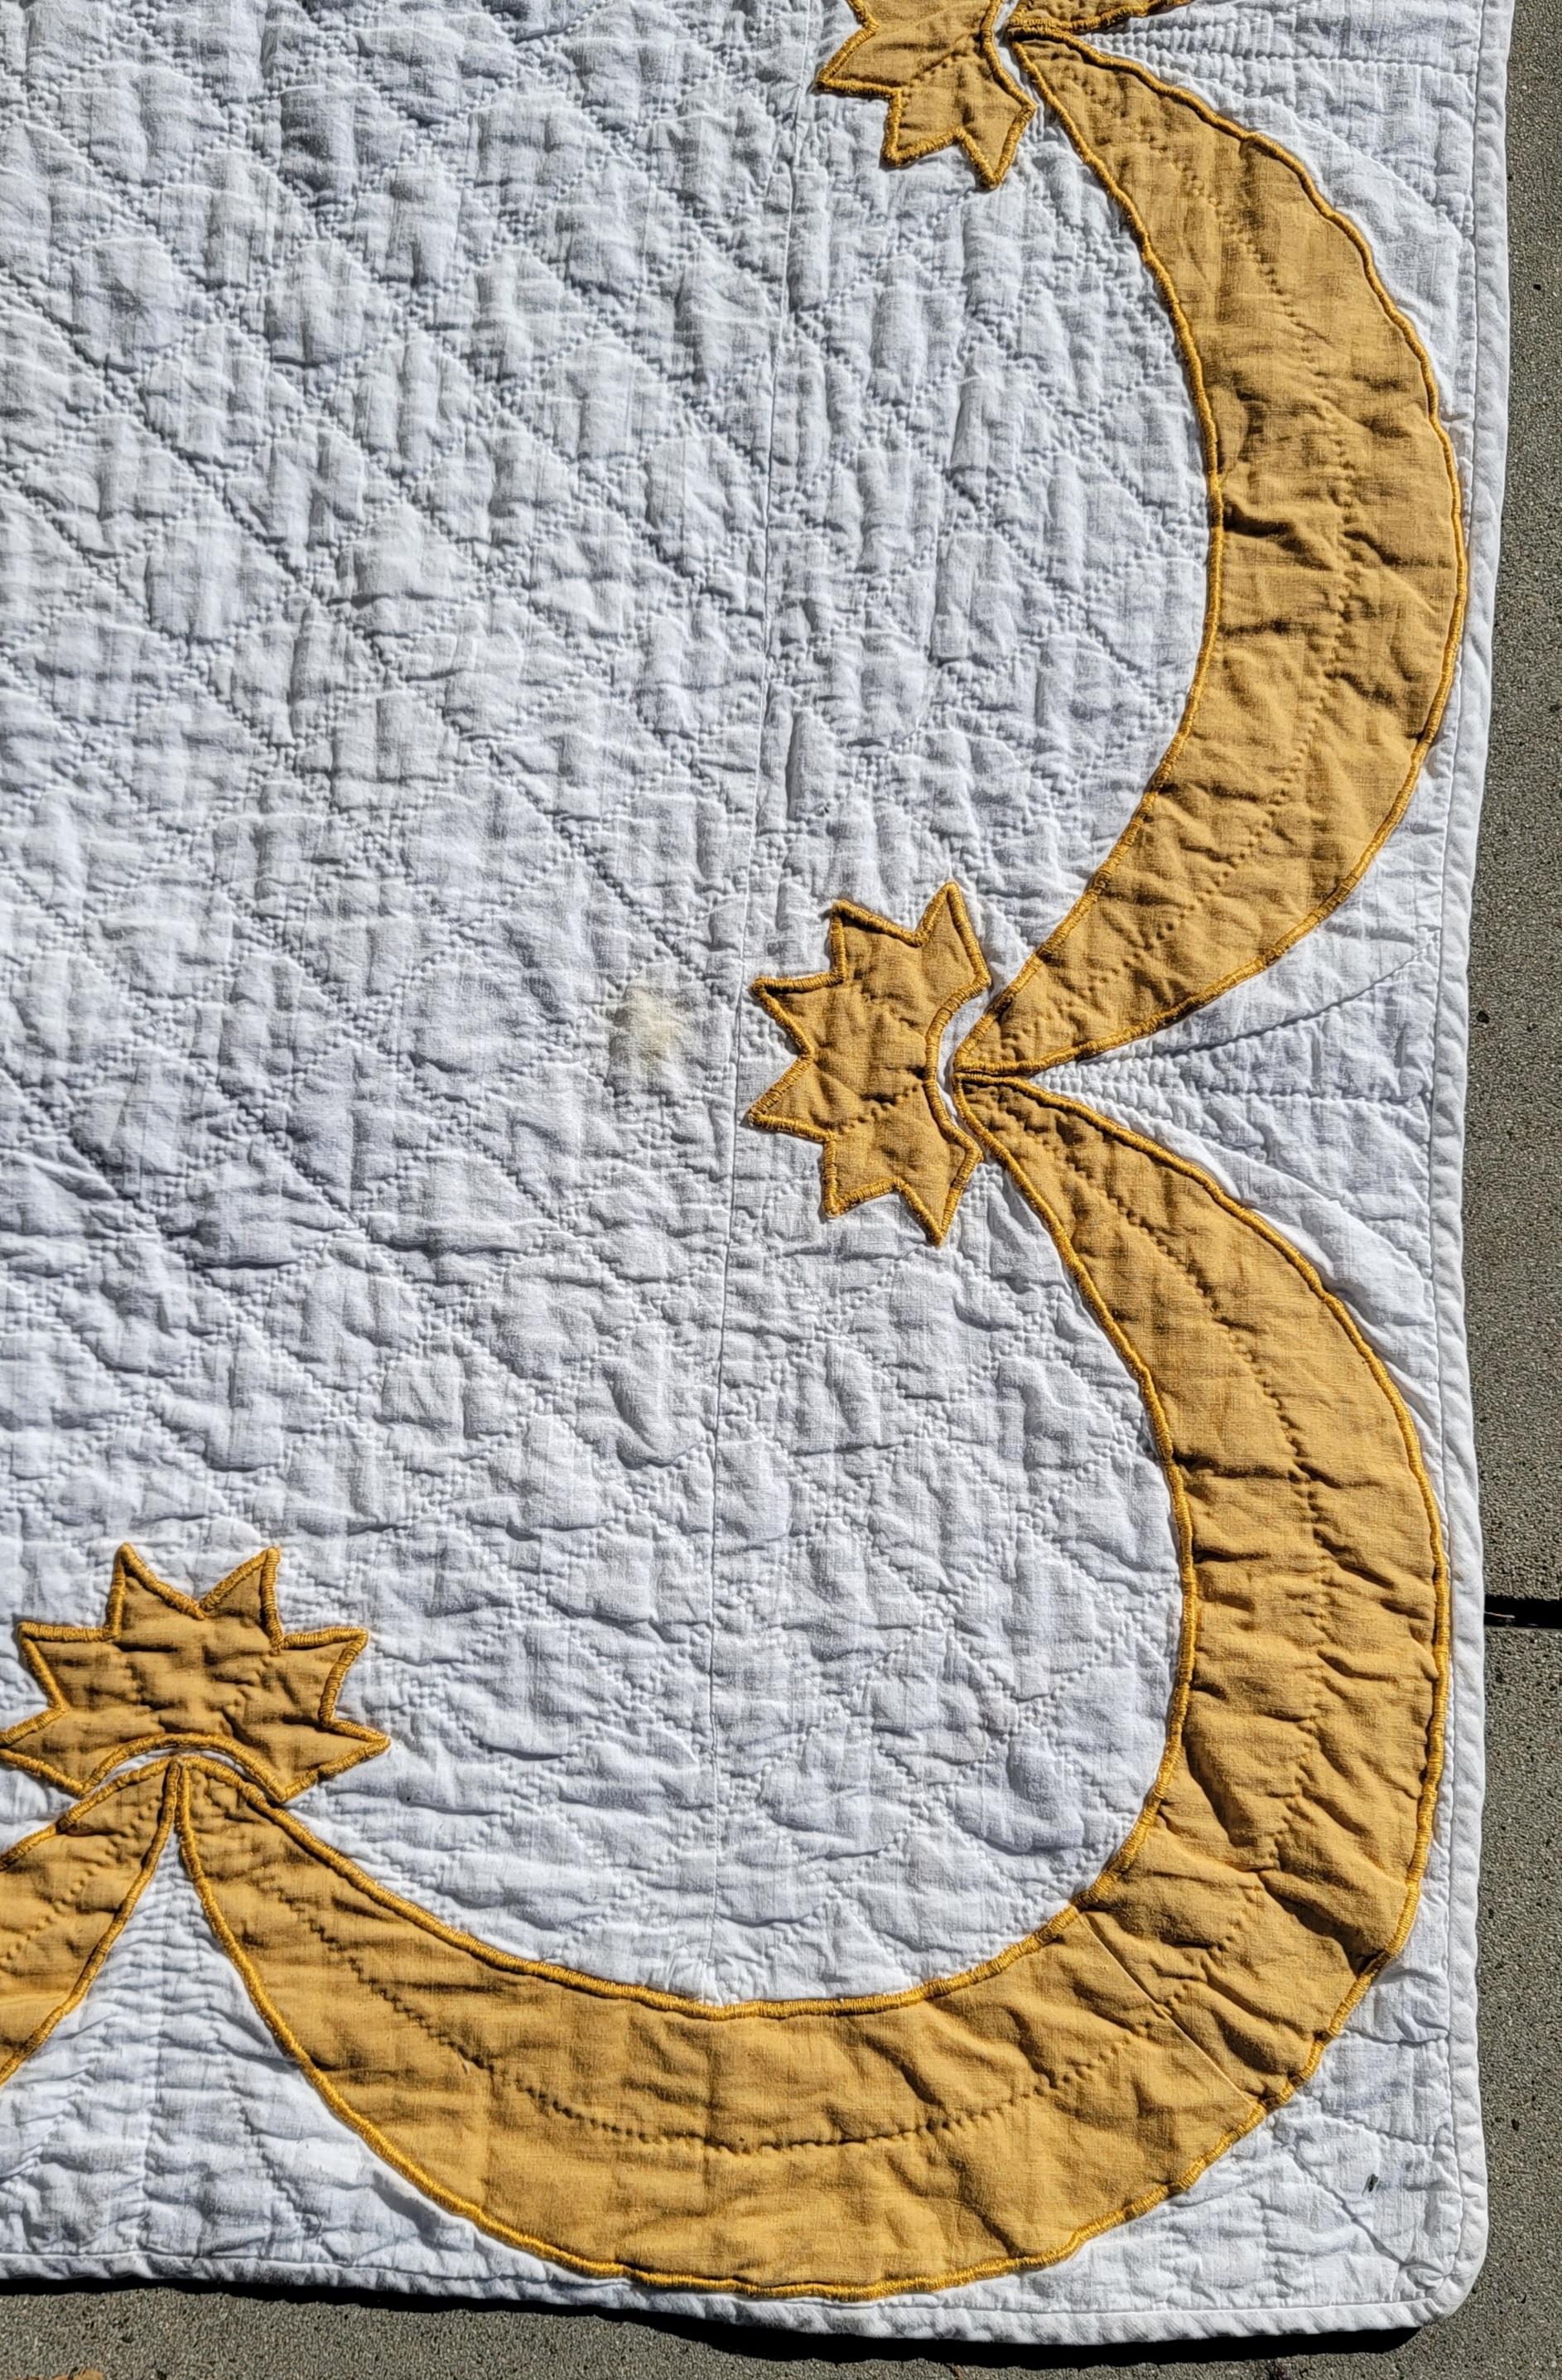 This fine eagle applique is in pristine condition. The swag border is quite nice as well and the quilt has very nice stitching and piecing. The quilt is so unusual in a golden rod color.